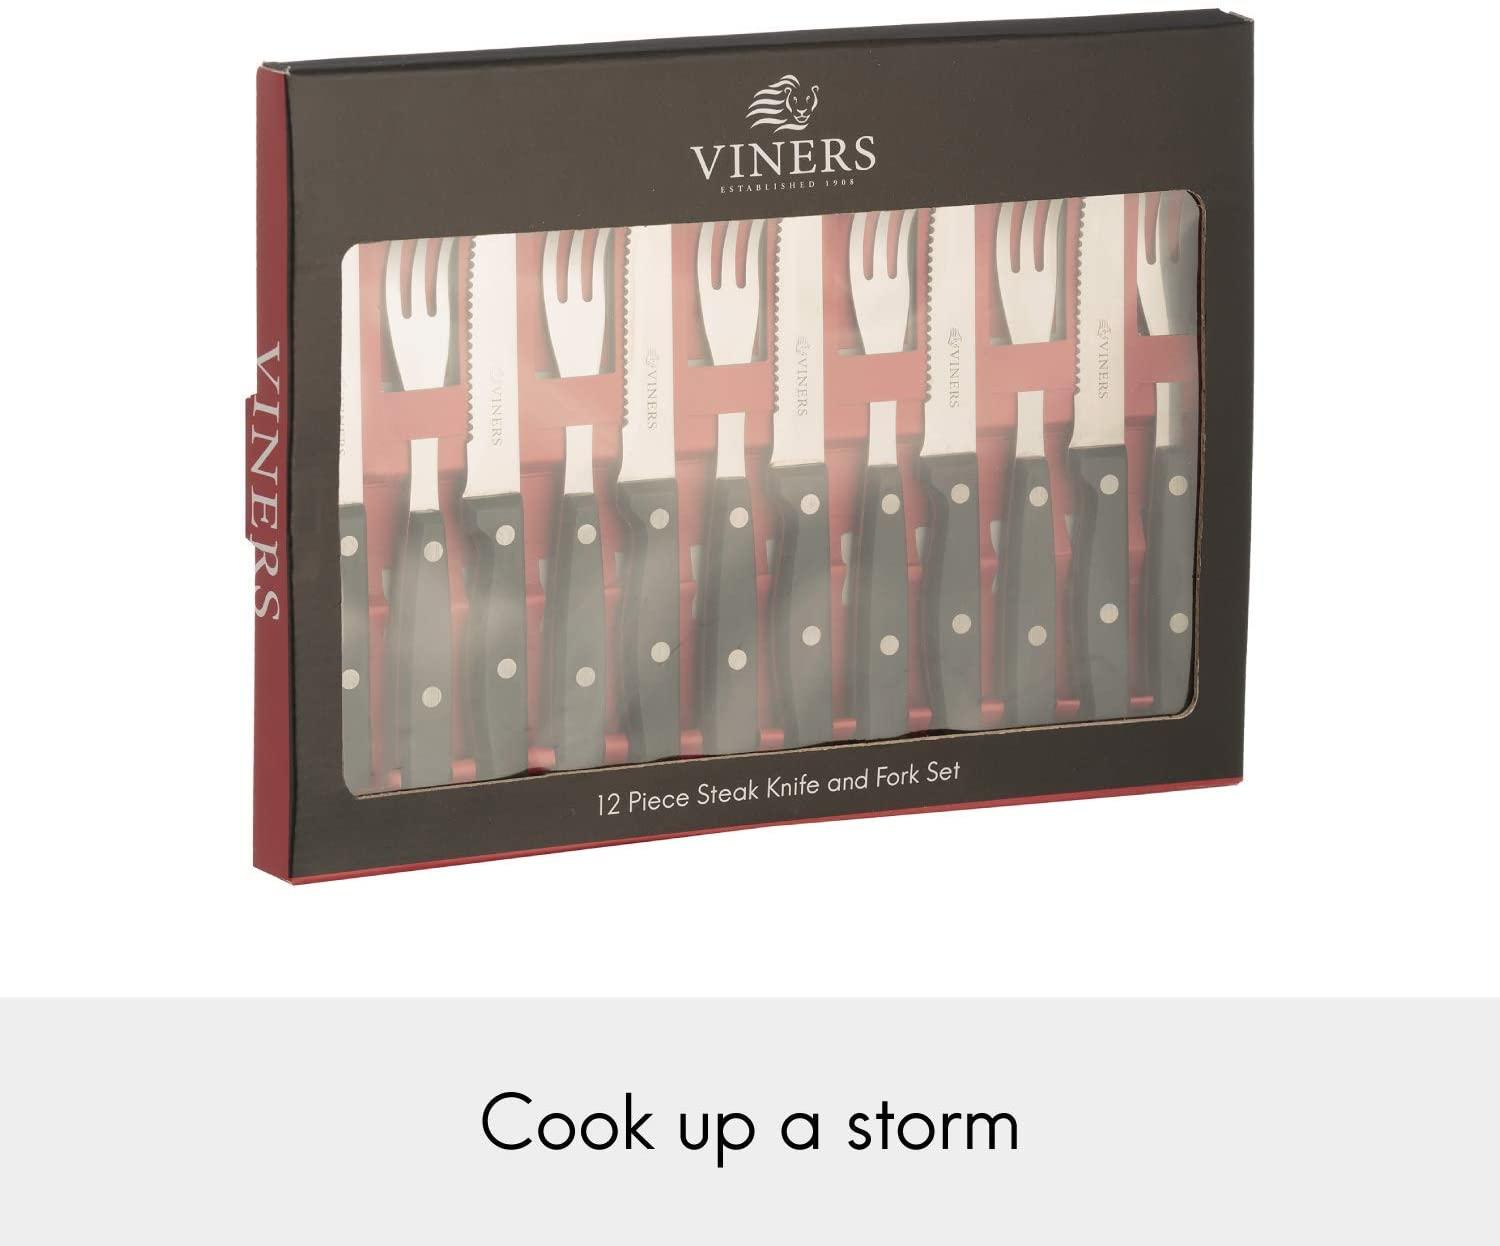 Viners 12 Piece Steak Knife And Fork Giftbox